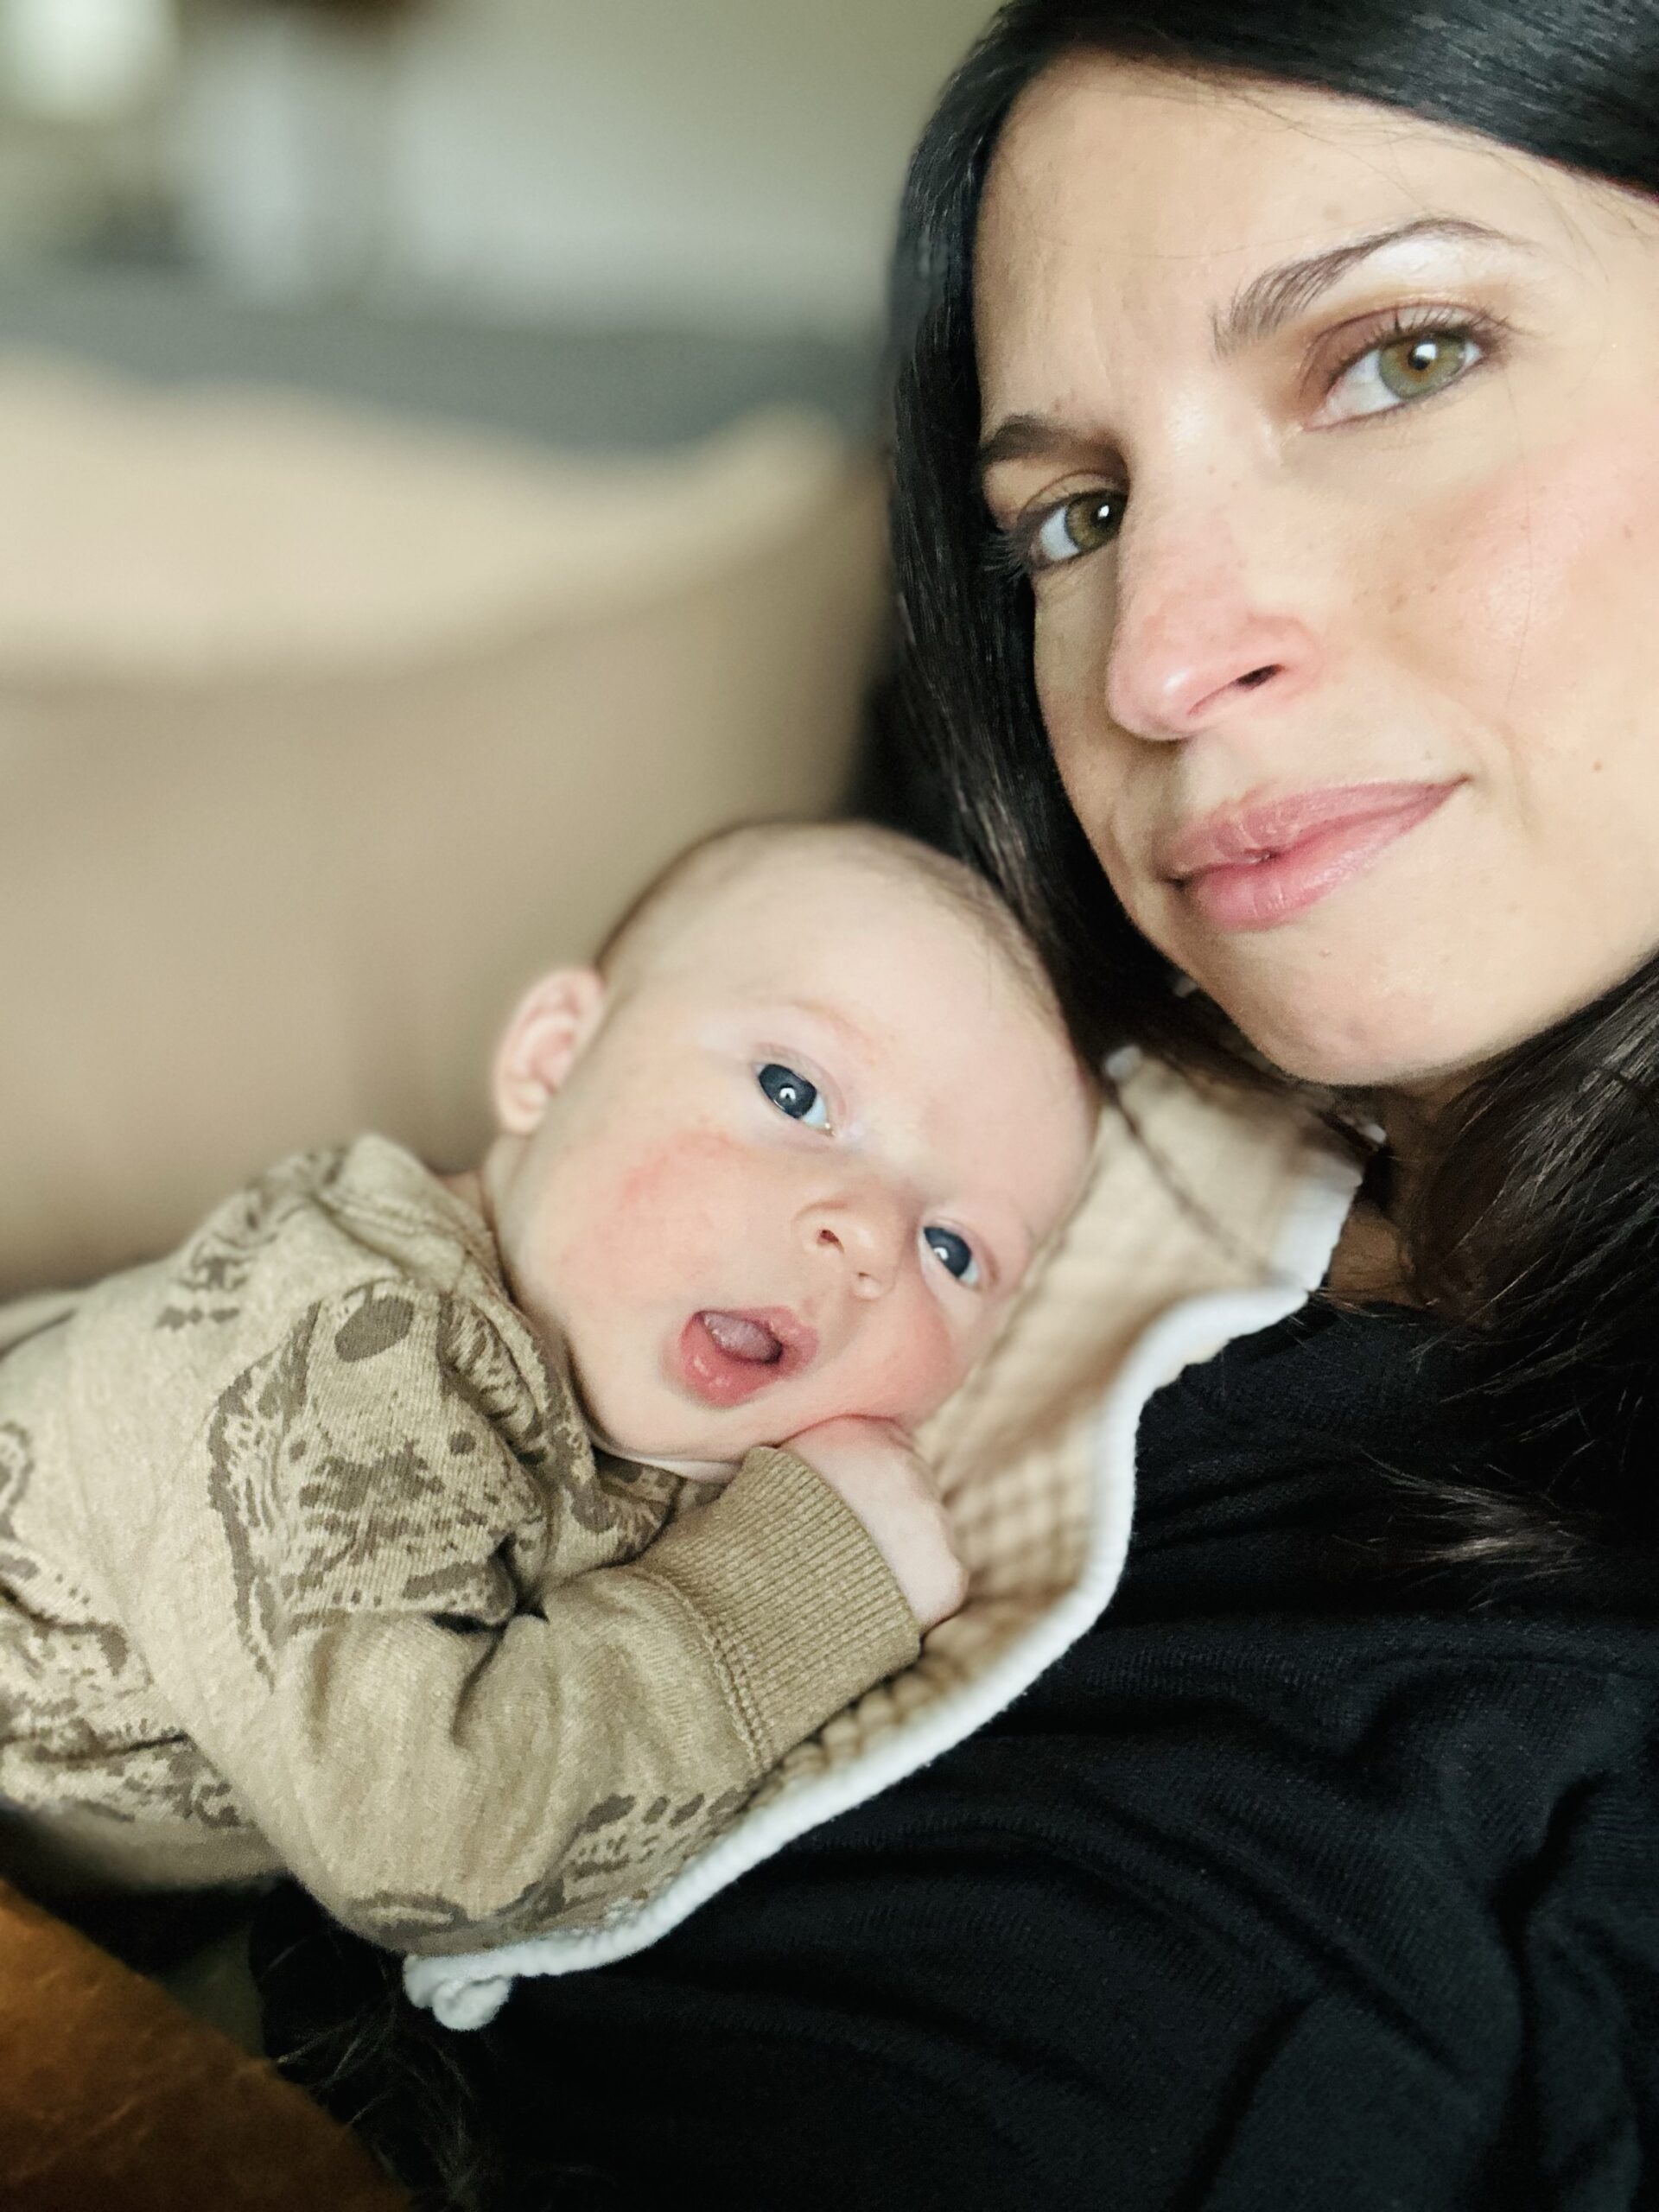 Bring a creative mom, the artist’s way & our new baby, Jaime Livingston